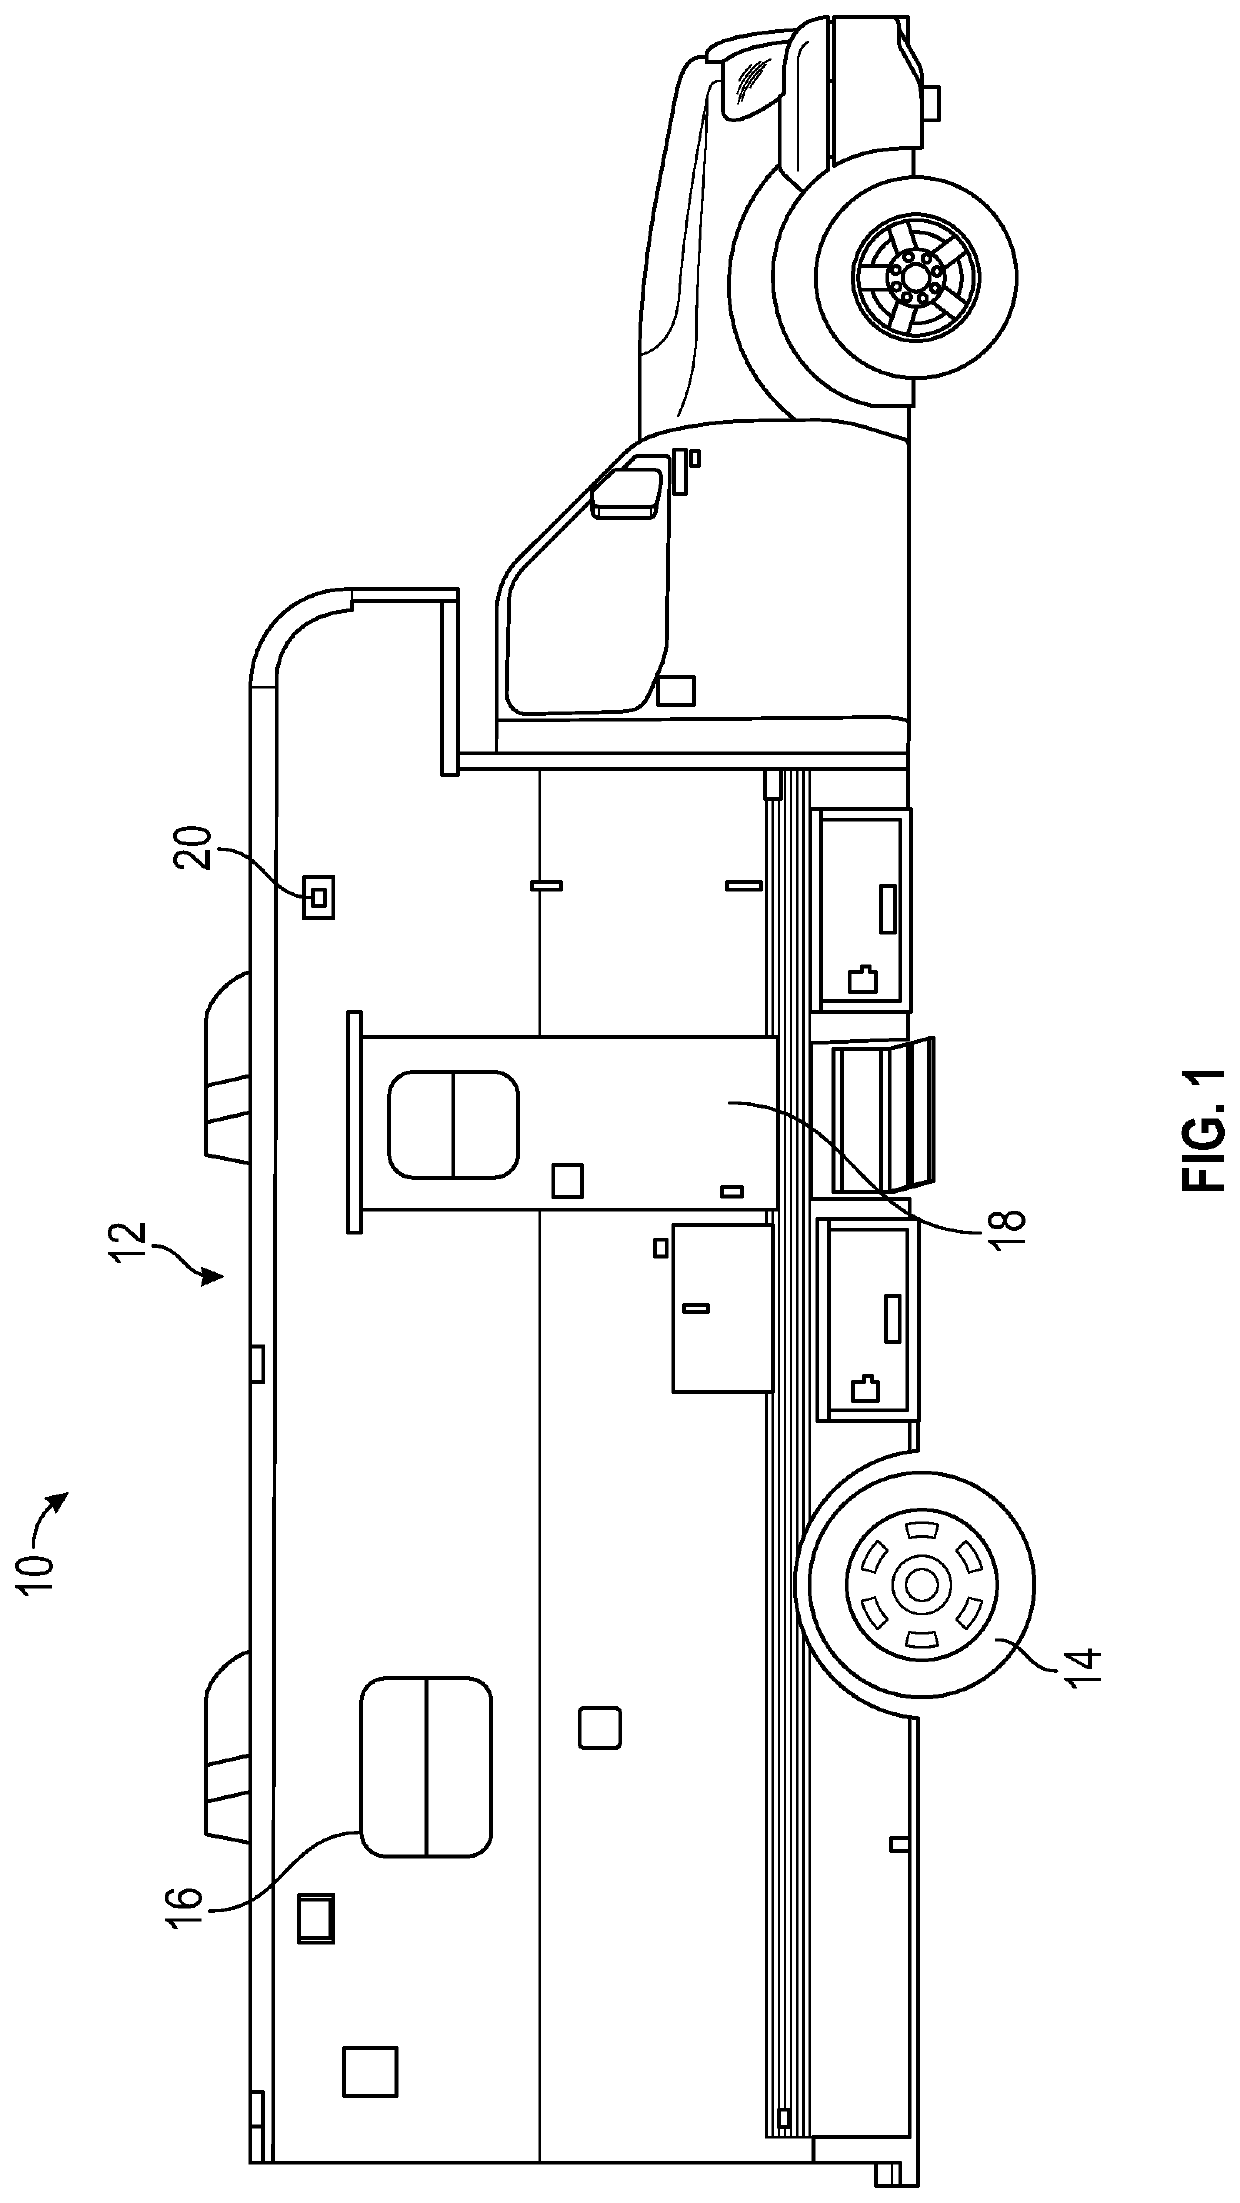 Mobile laboratory and method to expedite regulatory test results for agricultural, food, and/or beverage products